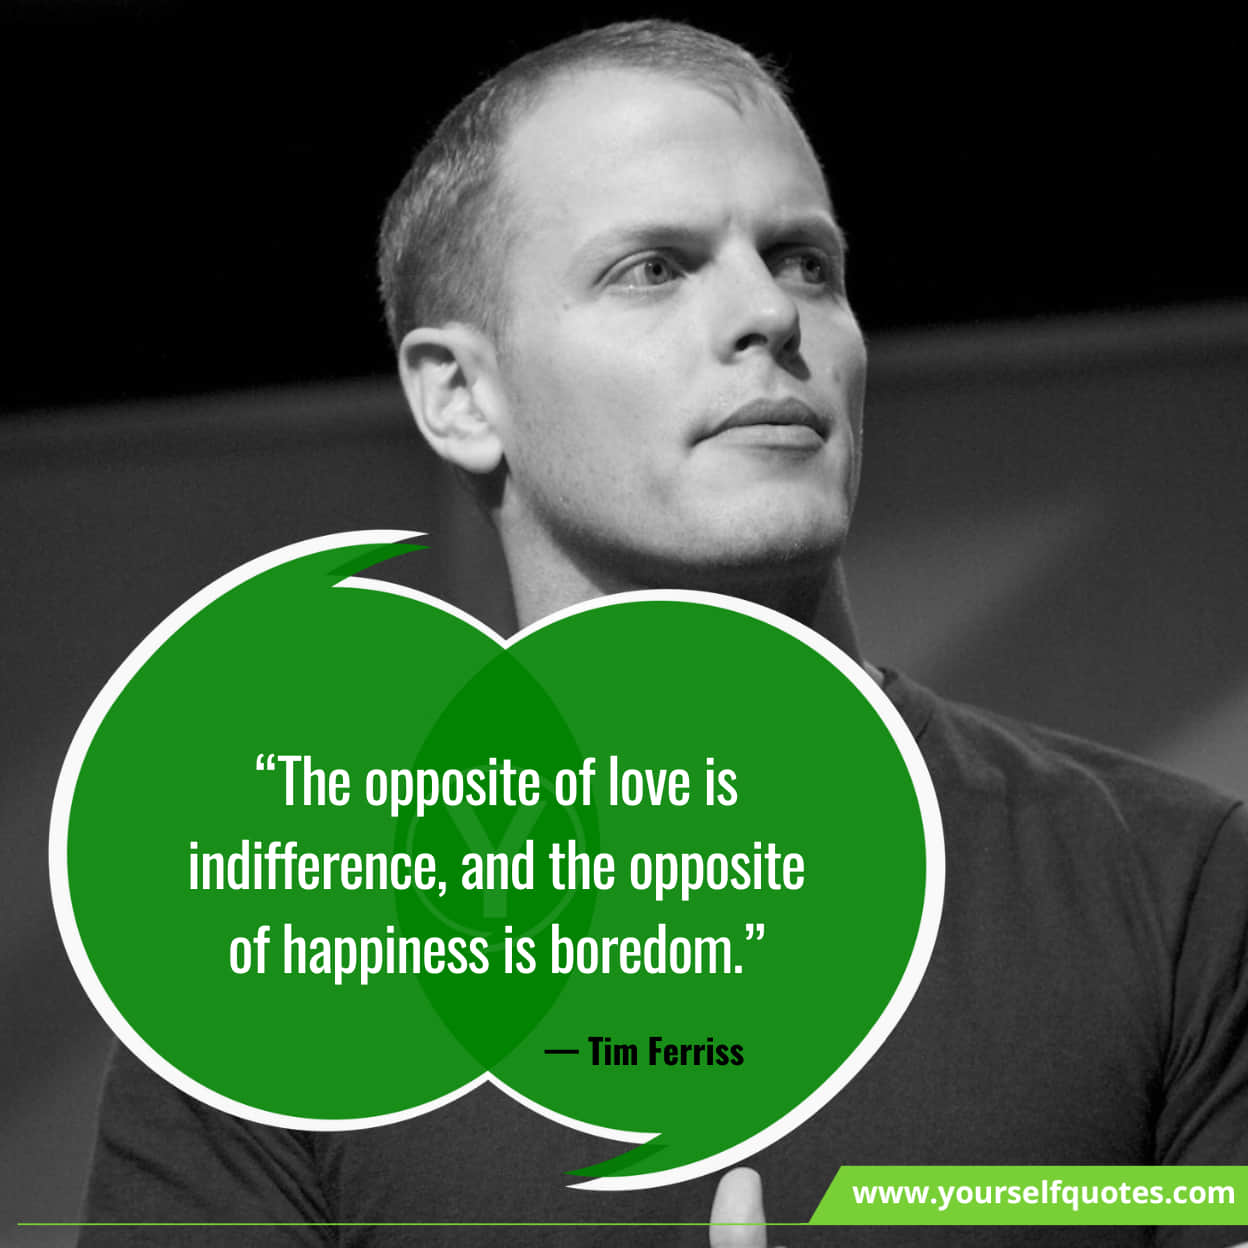 Tim Ferriss Quotes About Happiness